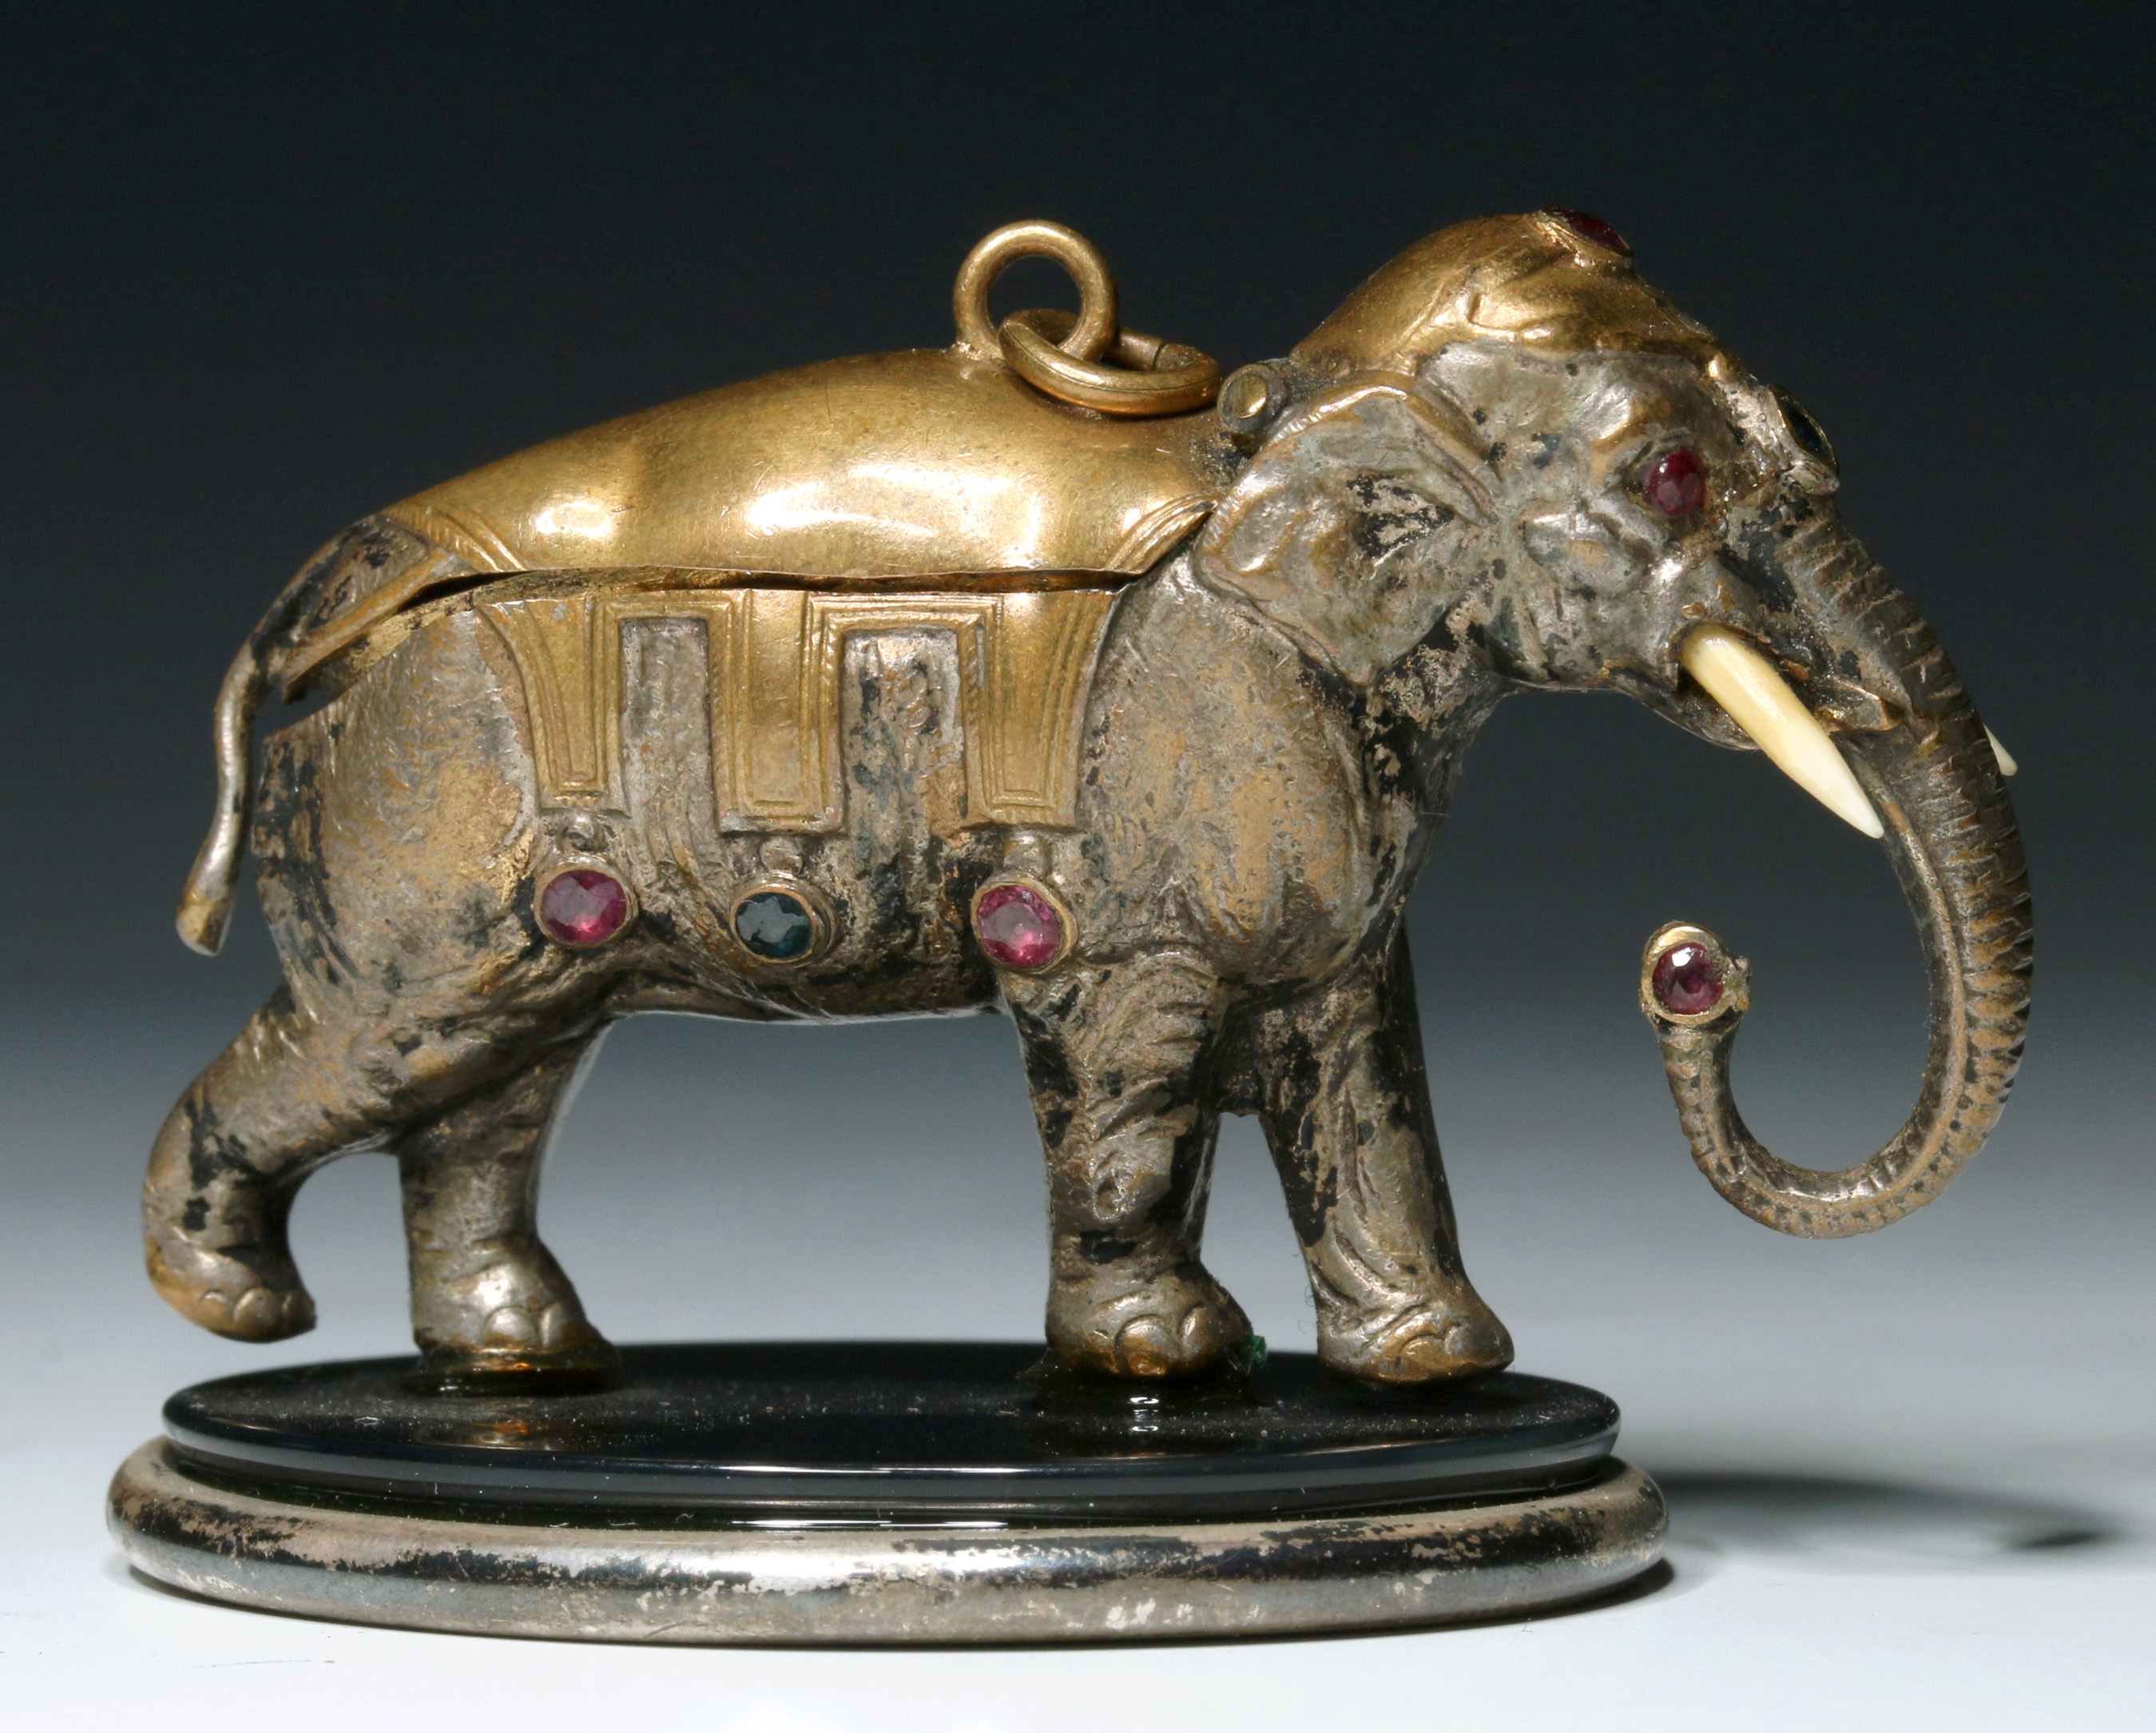 AN EARLY 19TH C. JEWELED ELEPHANT FIGURAL PATCH BO